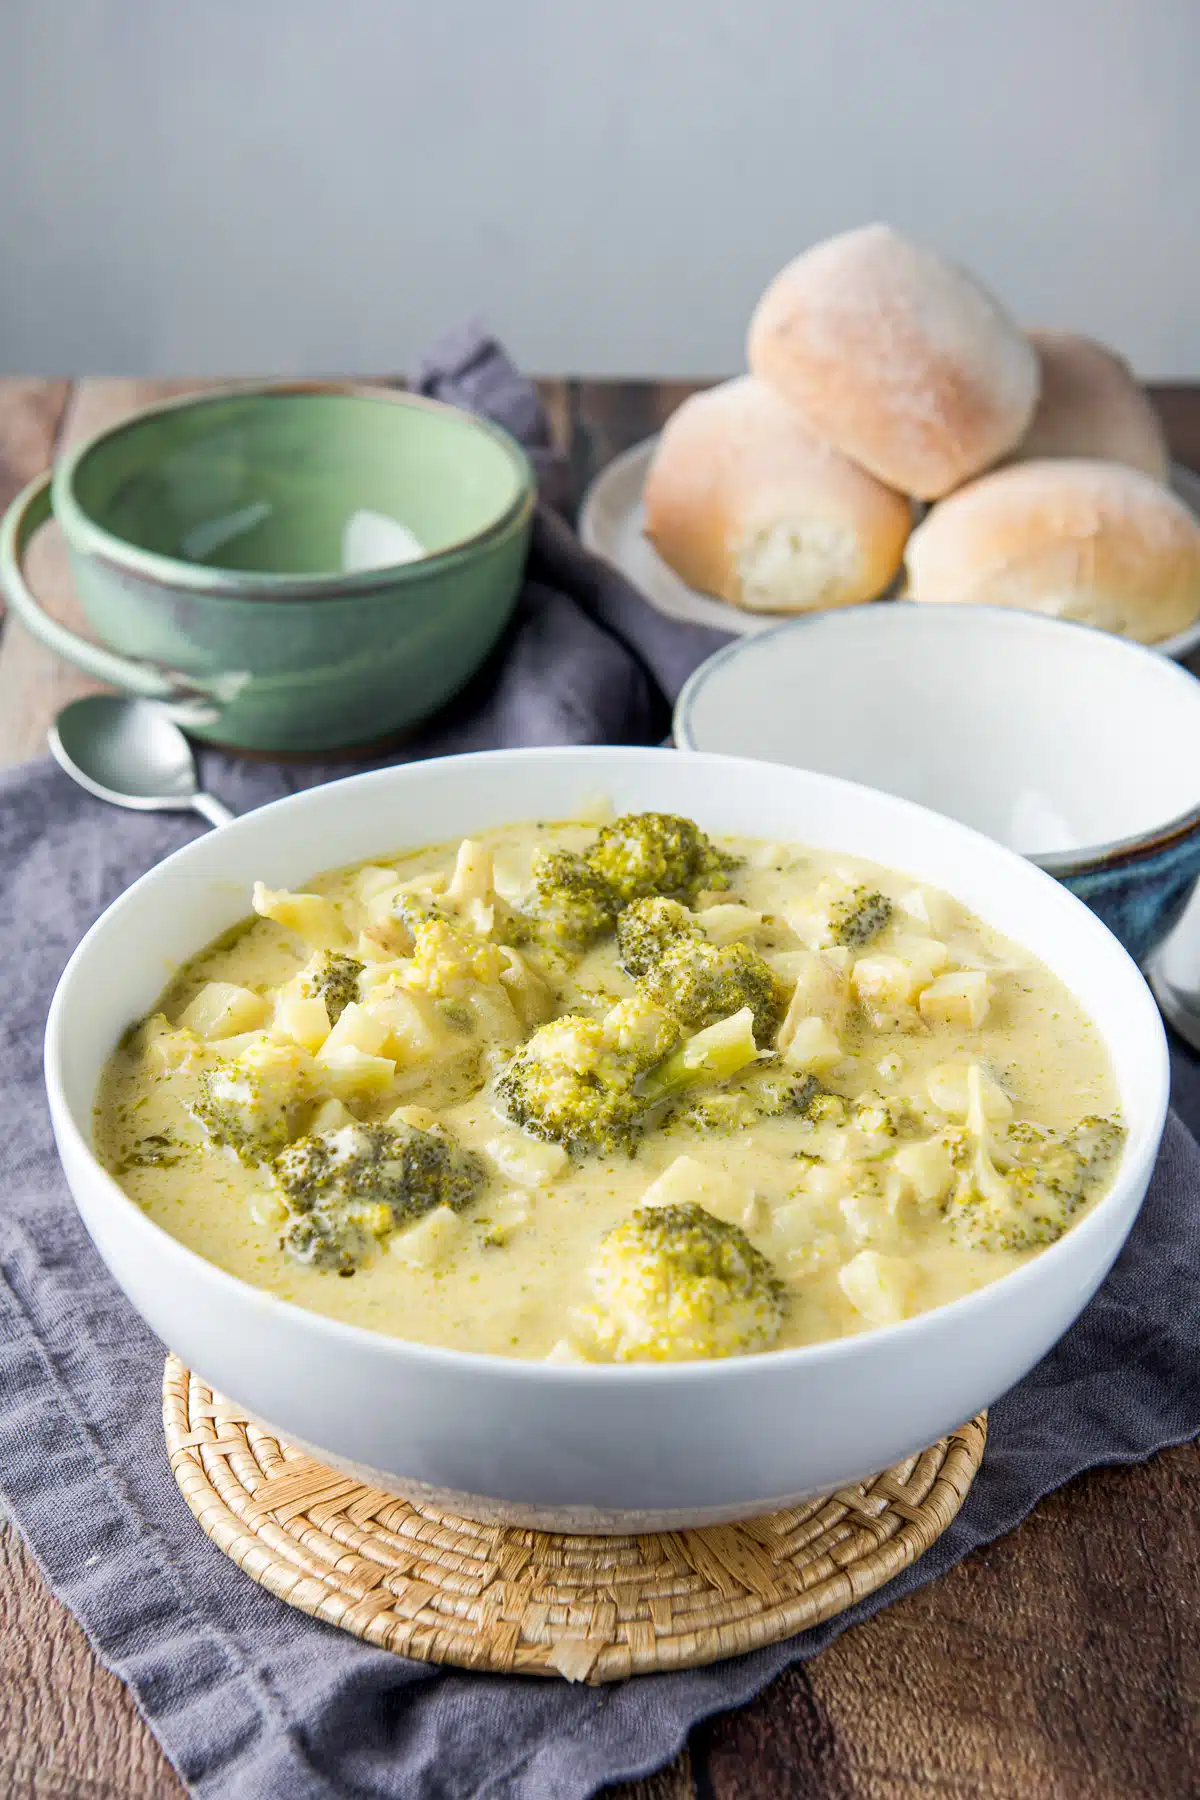 A large white bowl filled with the broccoli soup with two bowls in the back and a plate of rolls